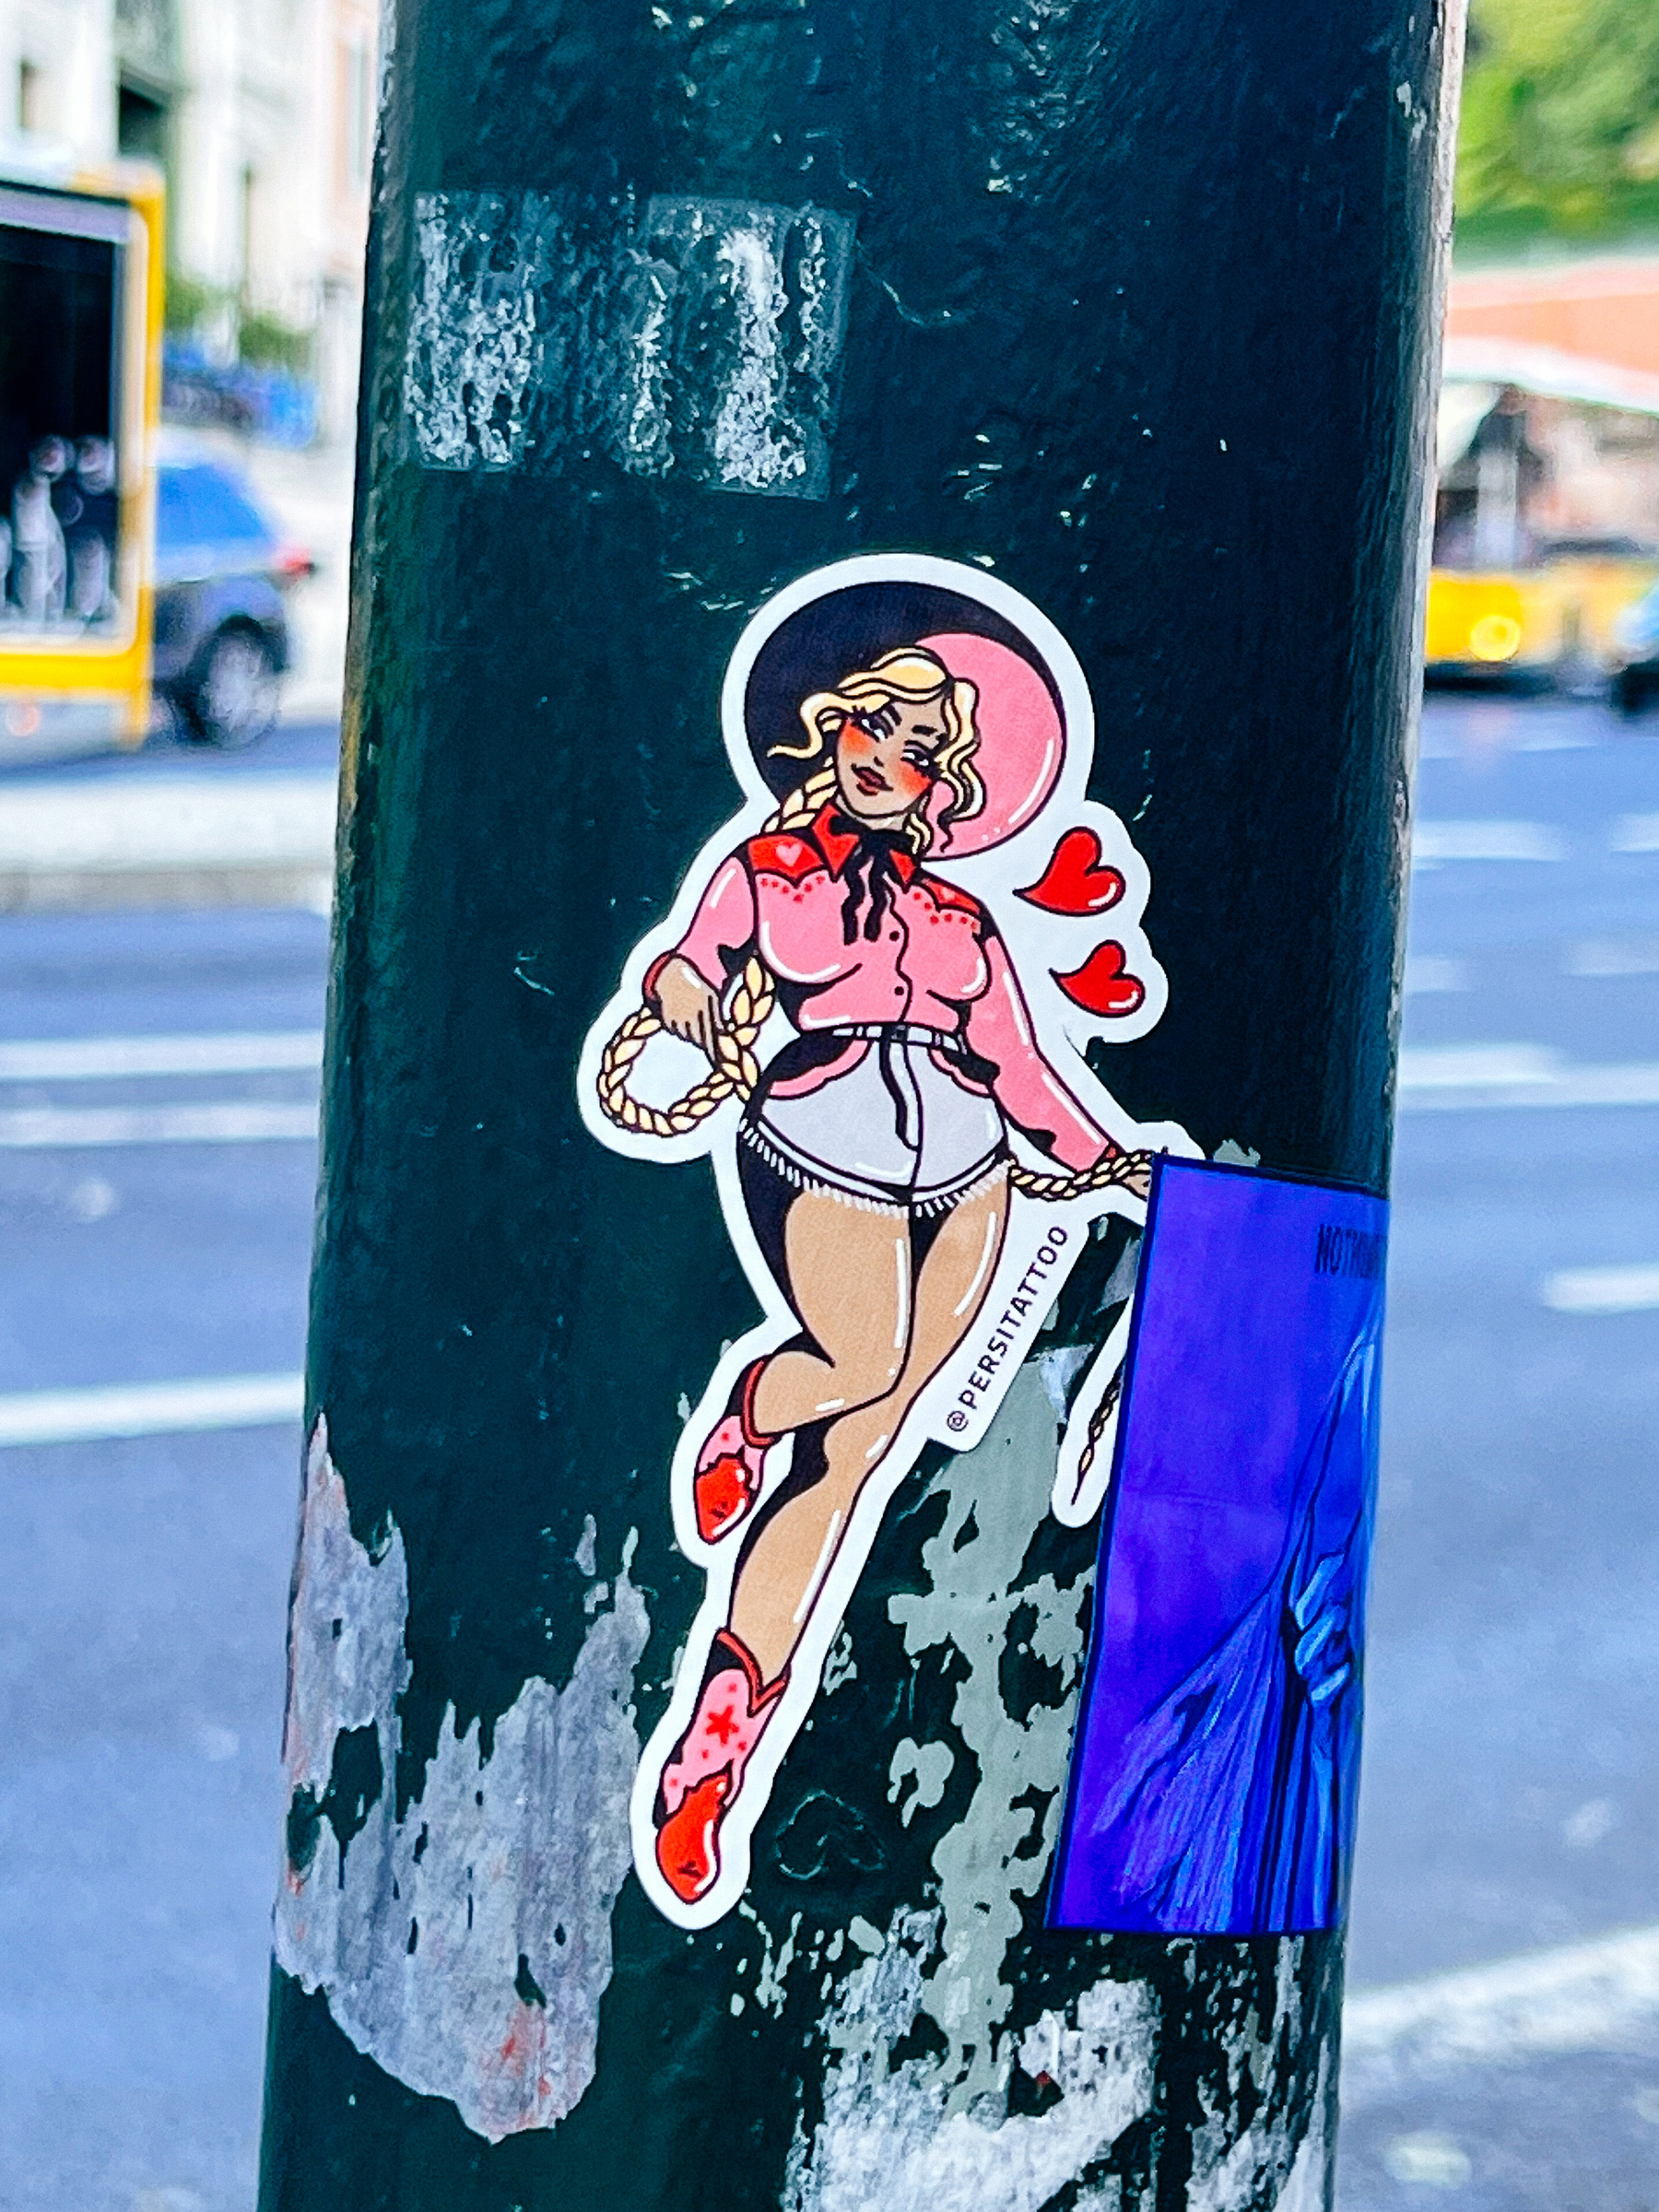 Sticker advertising a tattoo artist, with a drawing of a cowgirl pinup. 